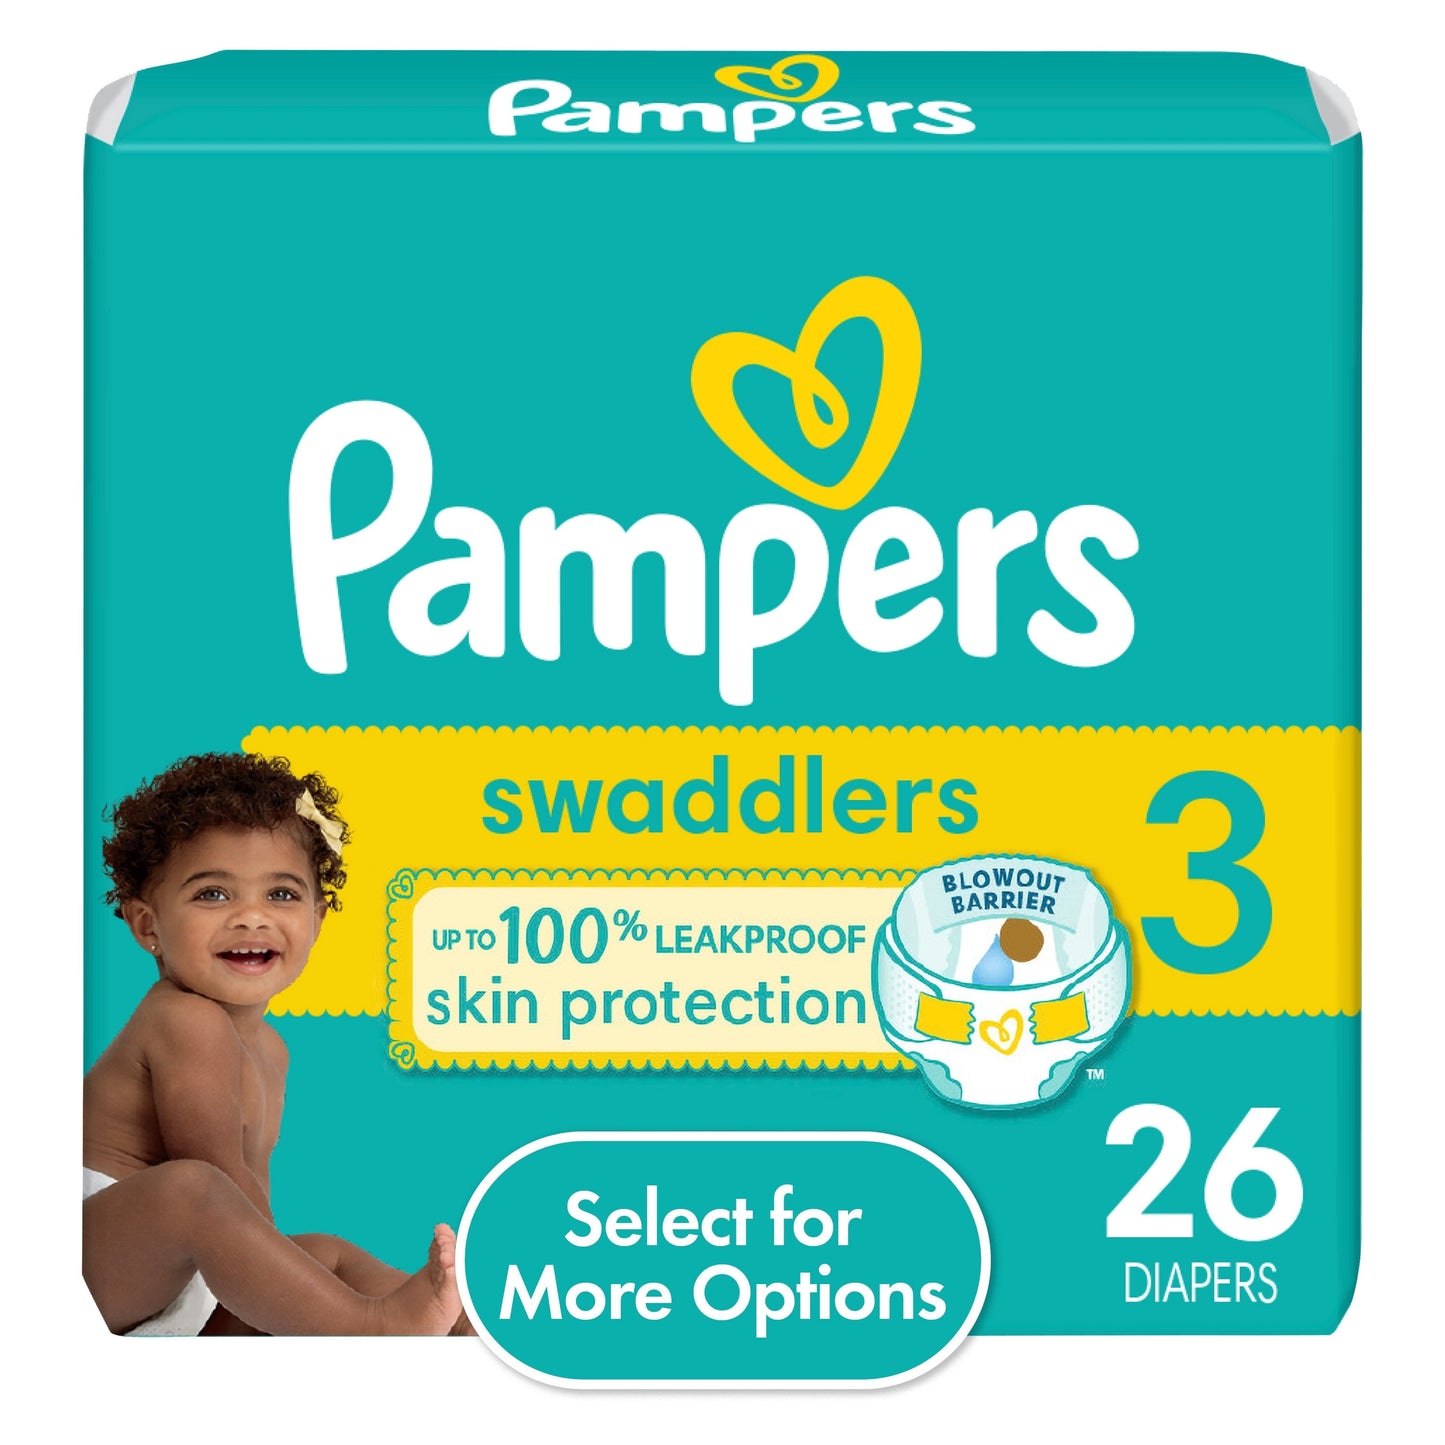 Pampers Swaddlers Diapers, Size 3, 26 Count